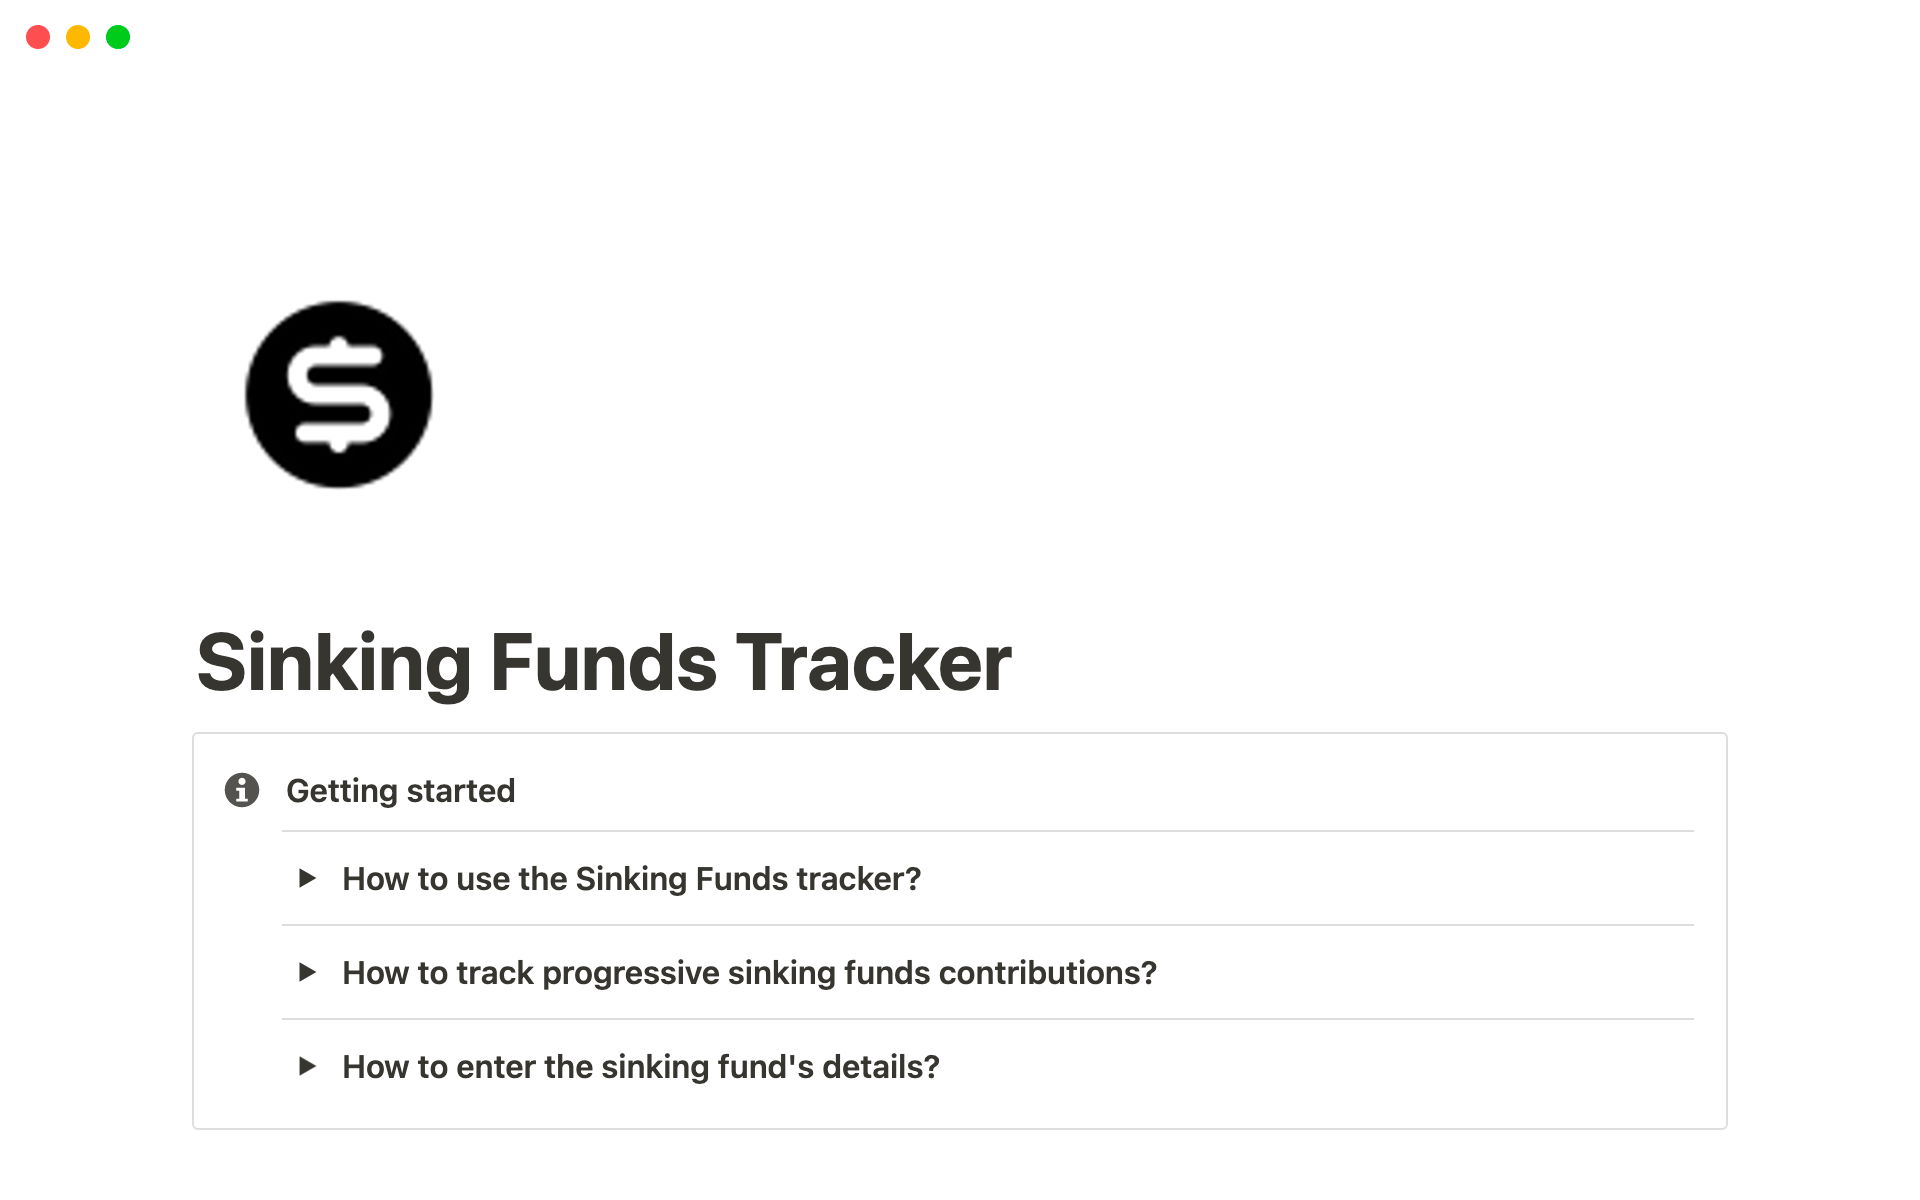 Save money creating sinking funds and track your progressive contributions and savings with Notion Sinking Funds Tracker.